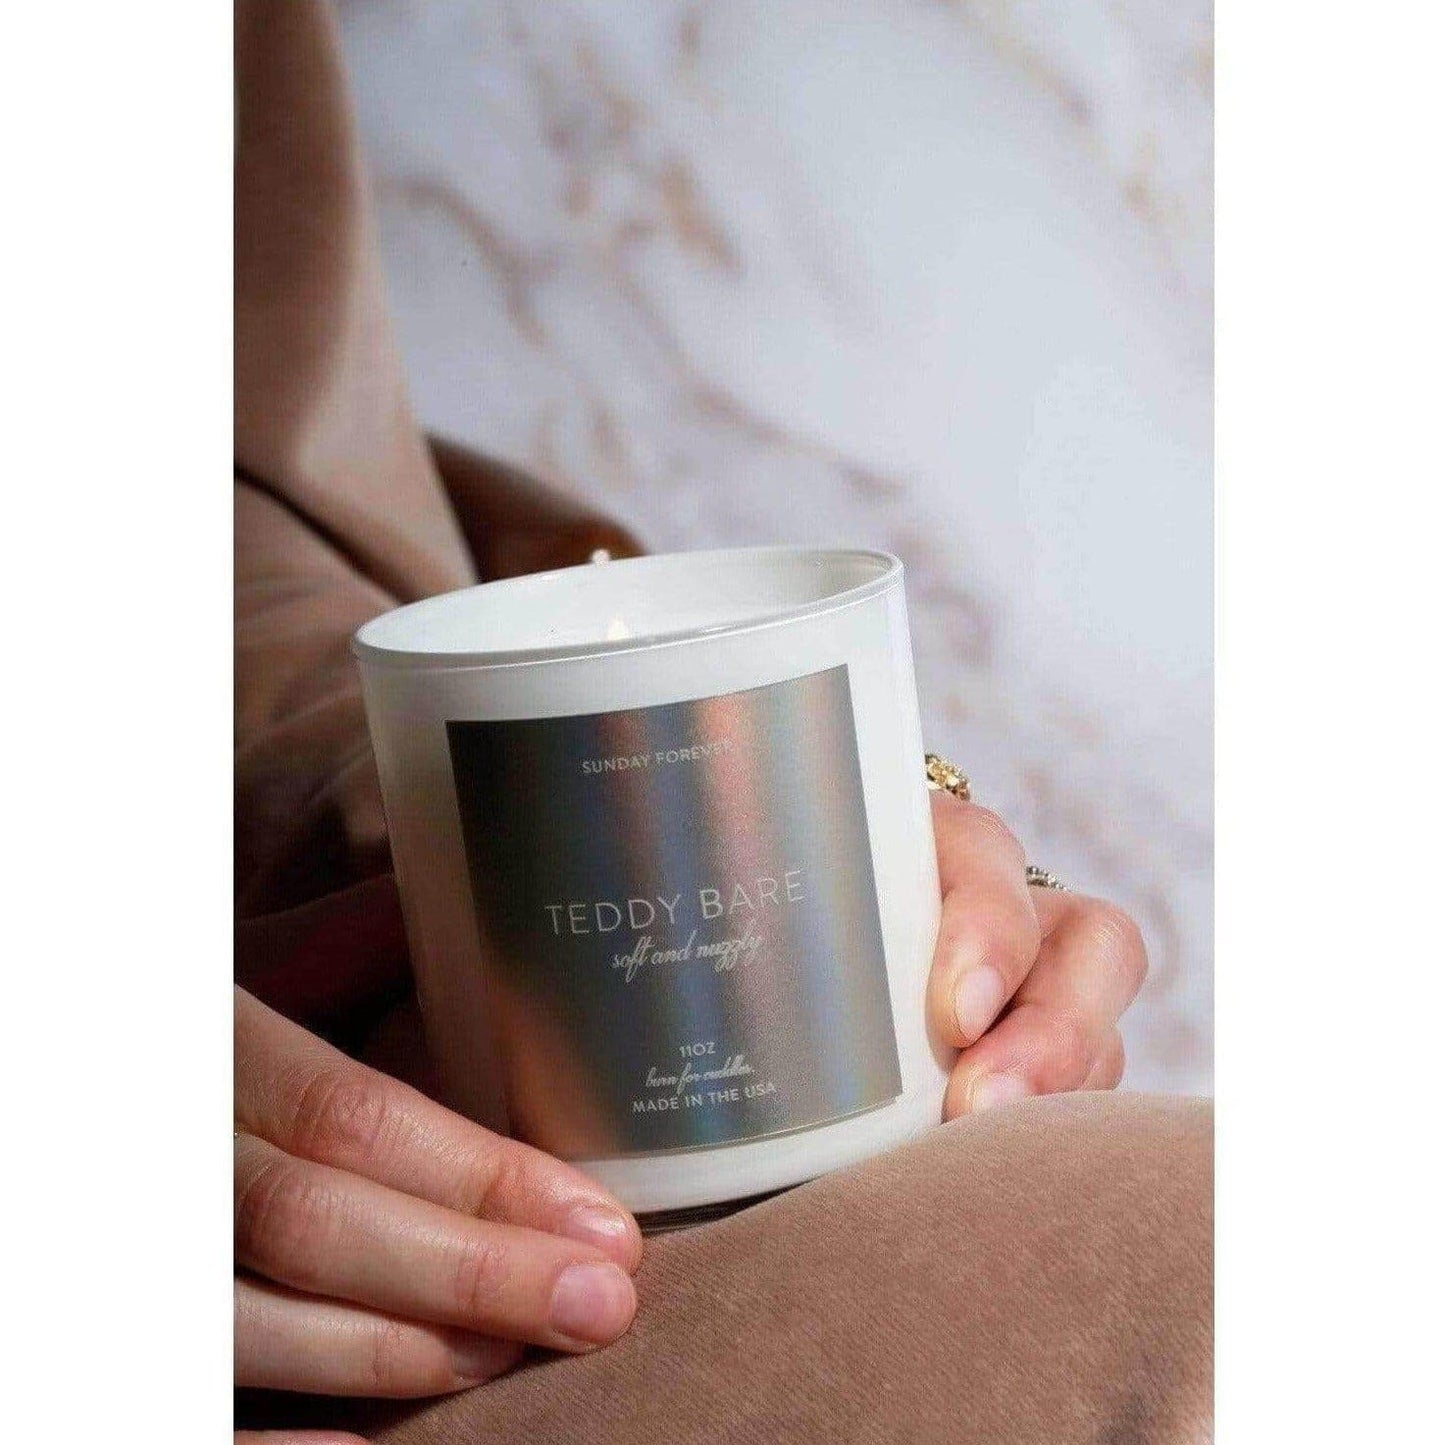 Teddy Bare Luxury Candle with Saffron and Musk - CANDLE-Sunday Forever